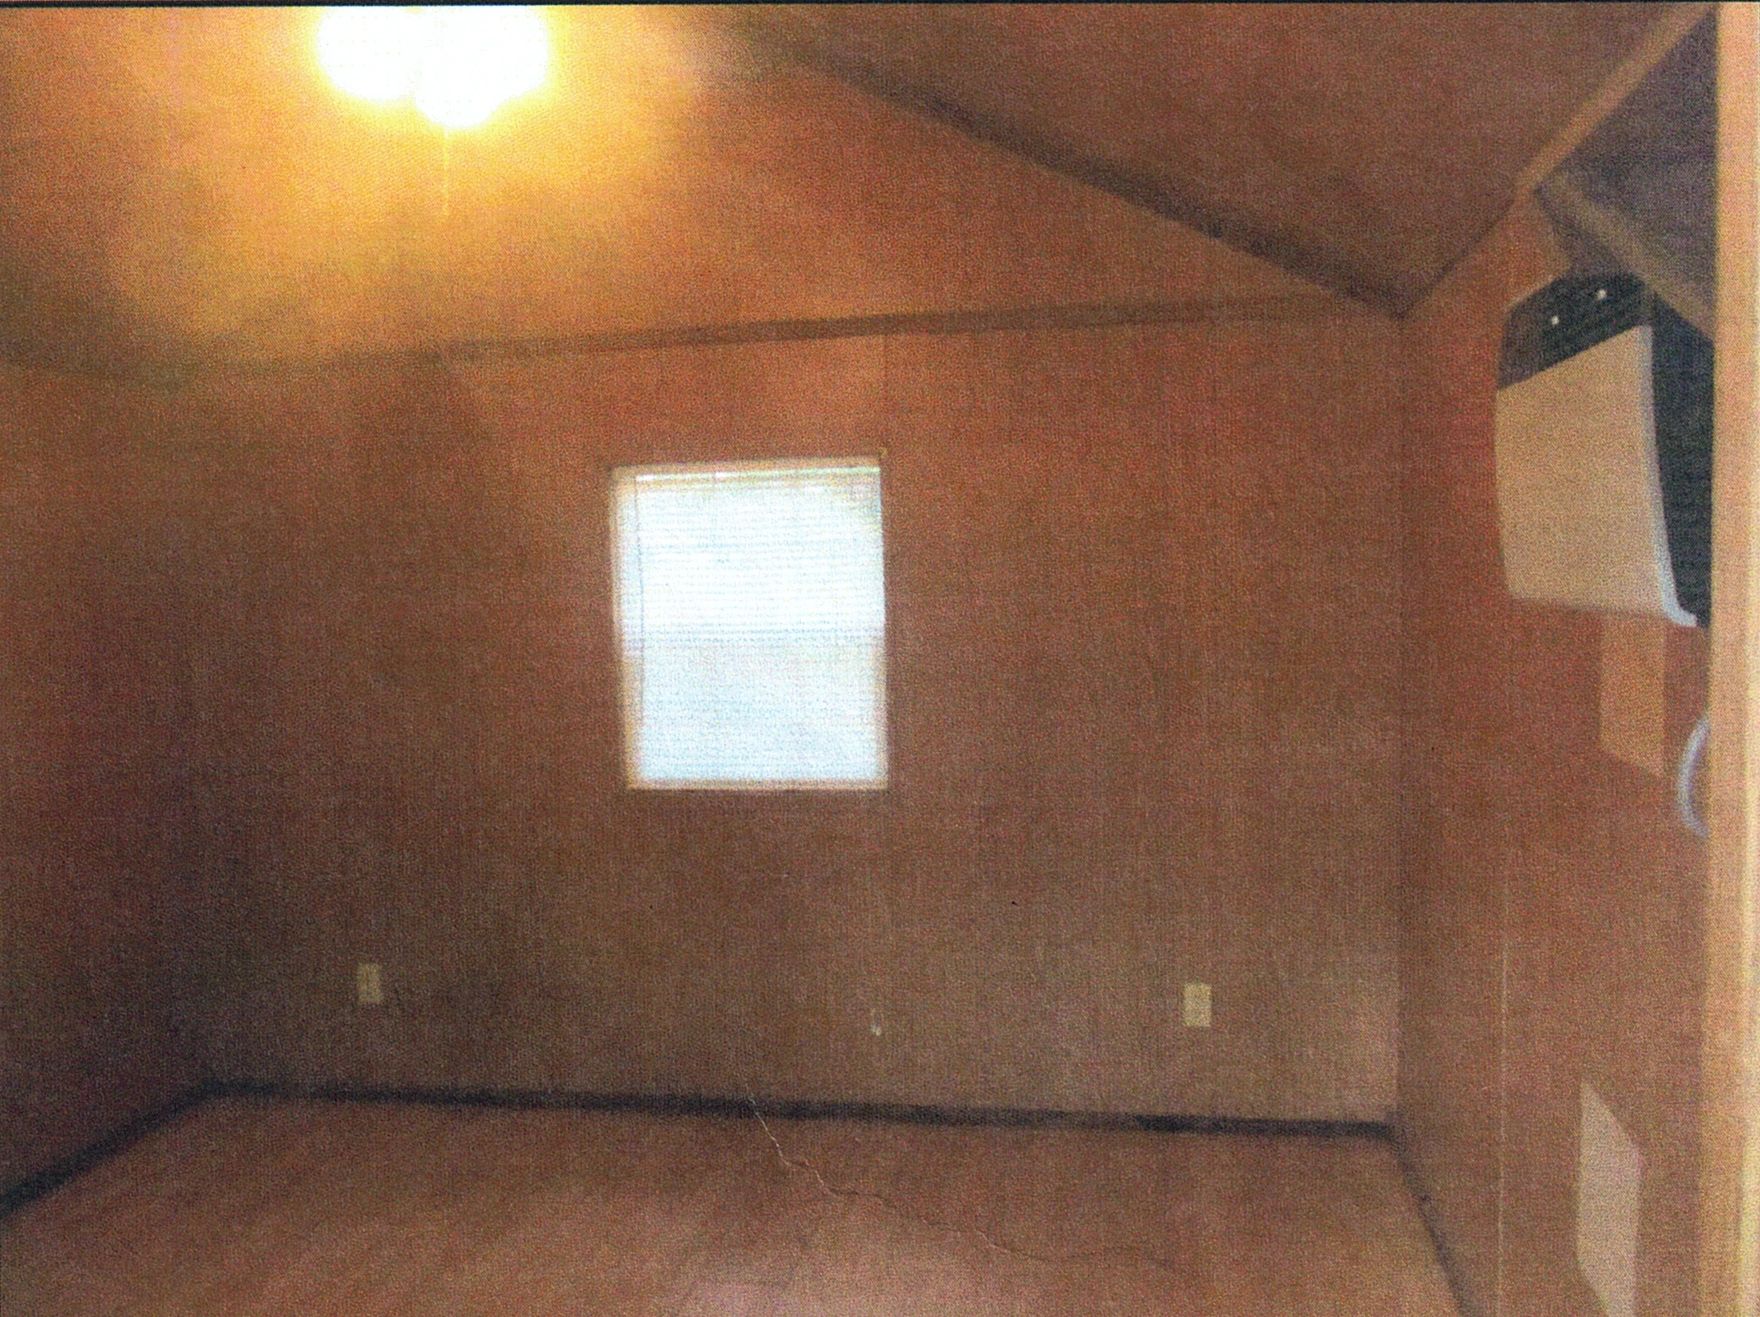 Inside of a cozy cabin rental at Hanna Park showing the floor and a window